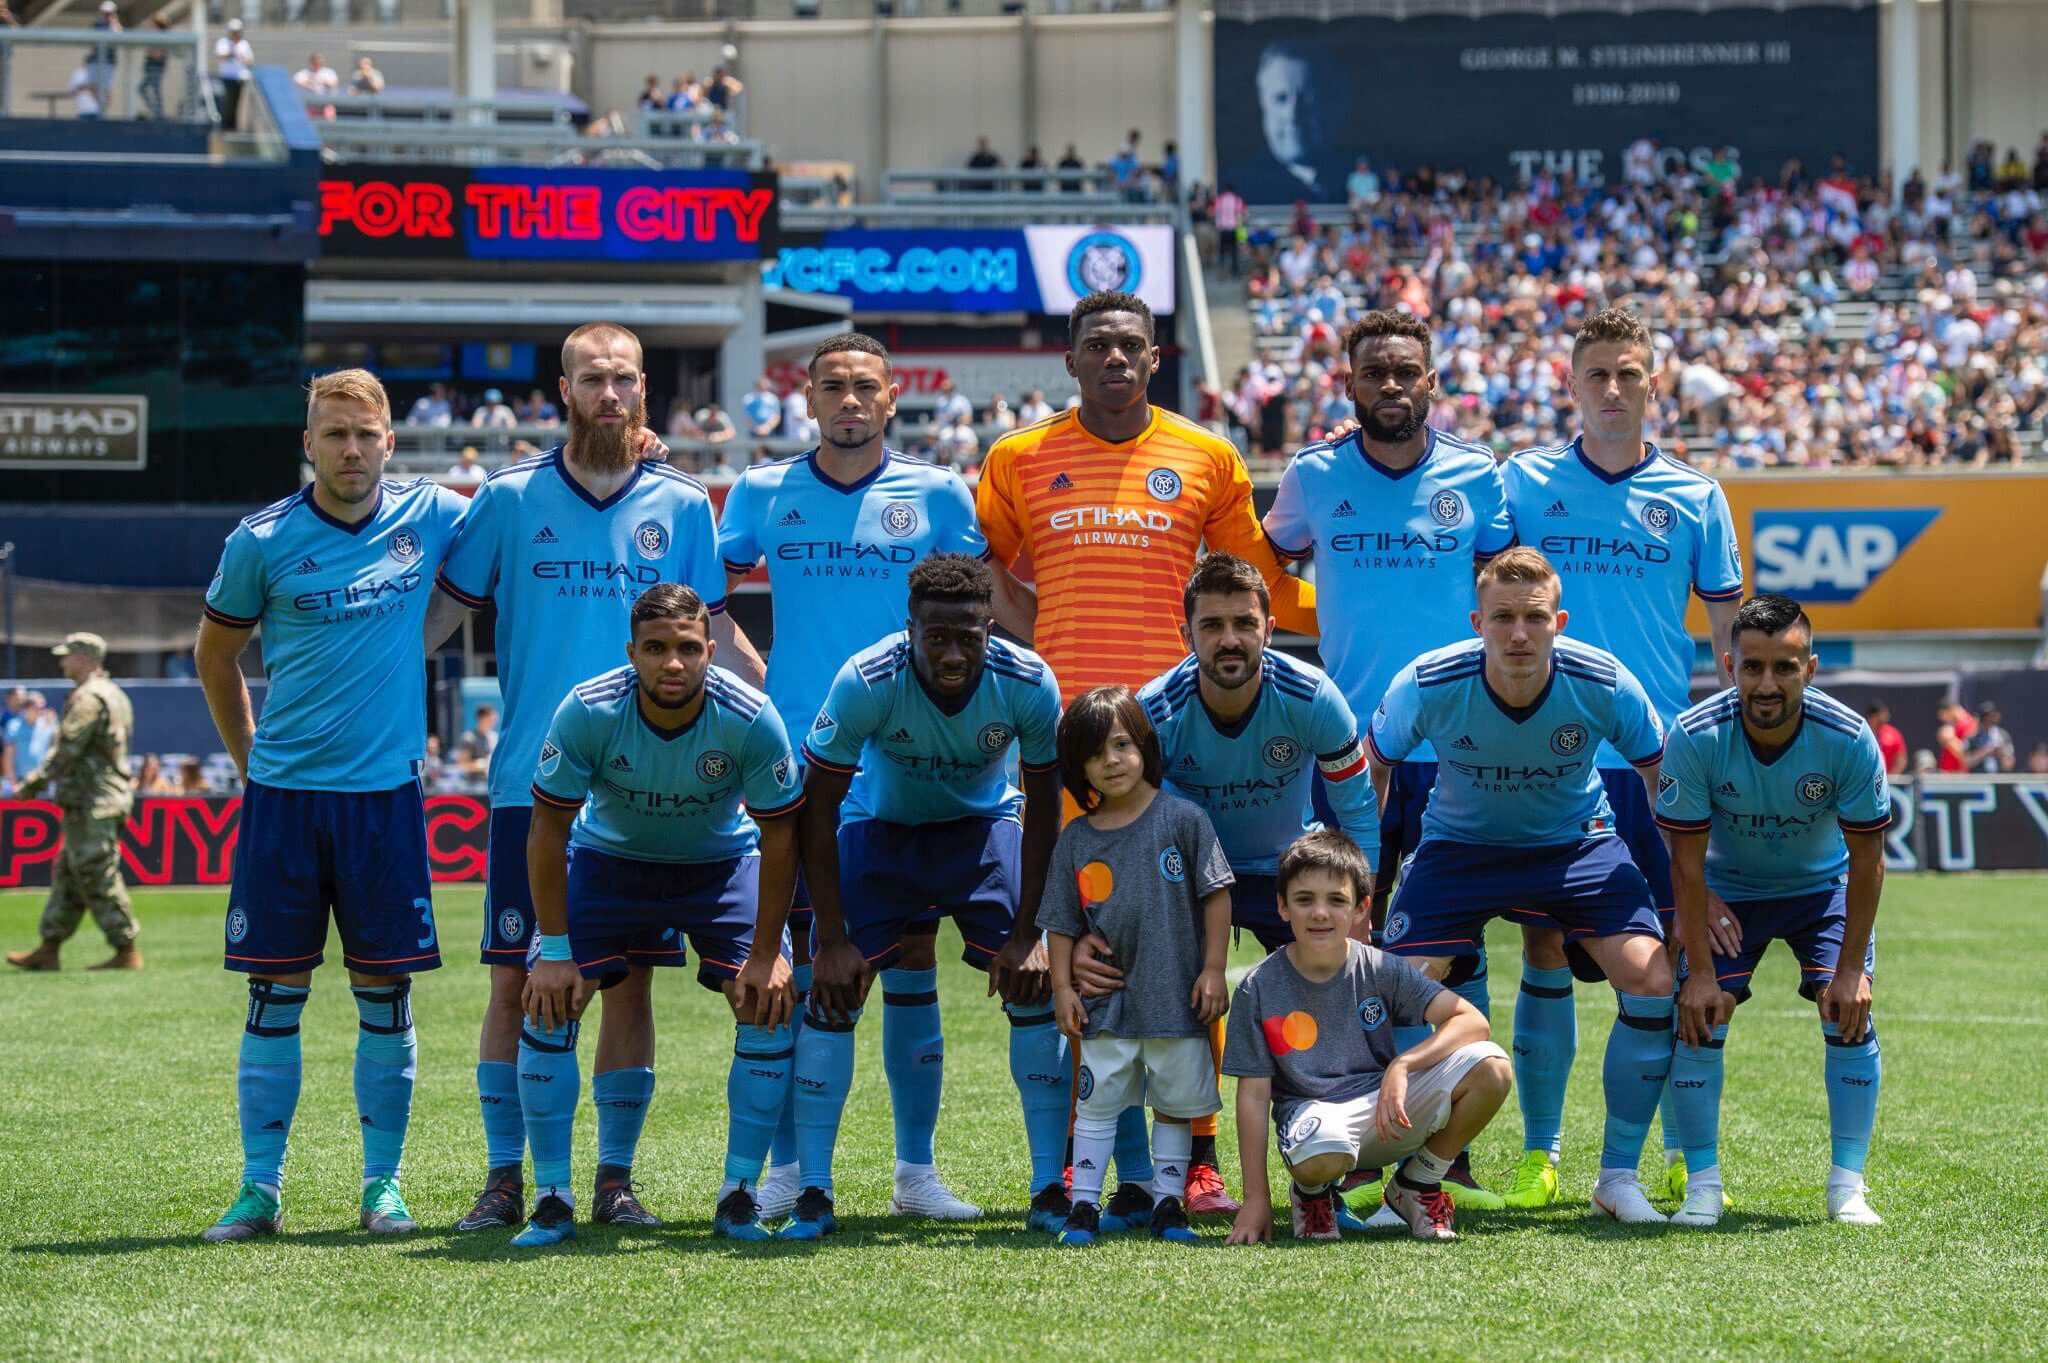 Game day at the NYCFC soccer game! Let’s go blue! #proudsponsors 